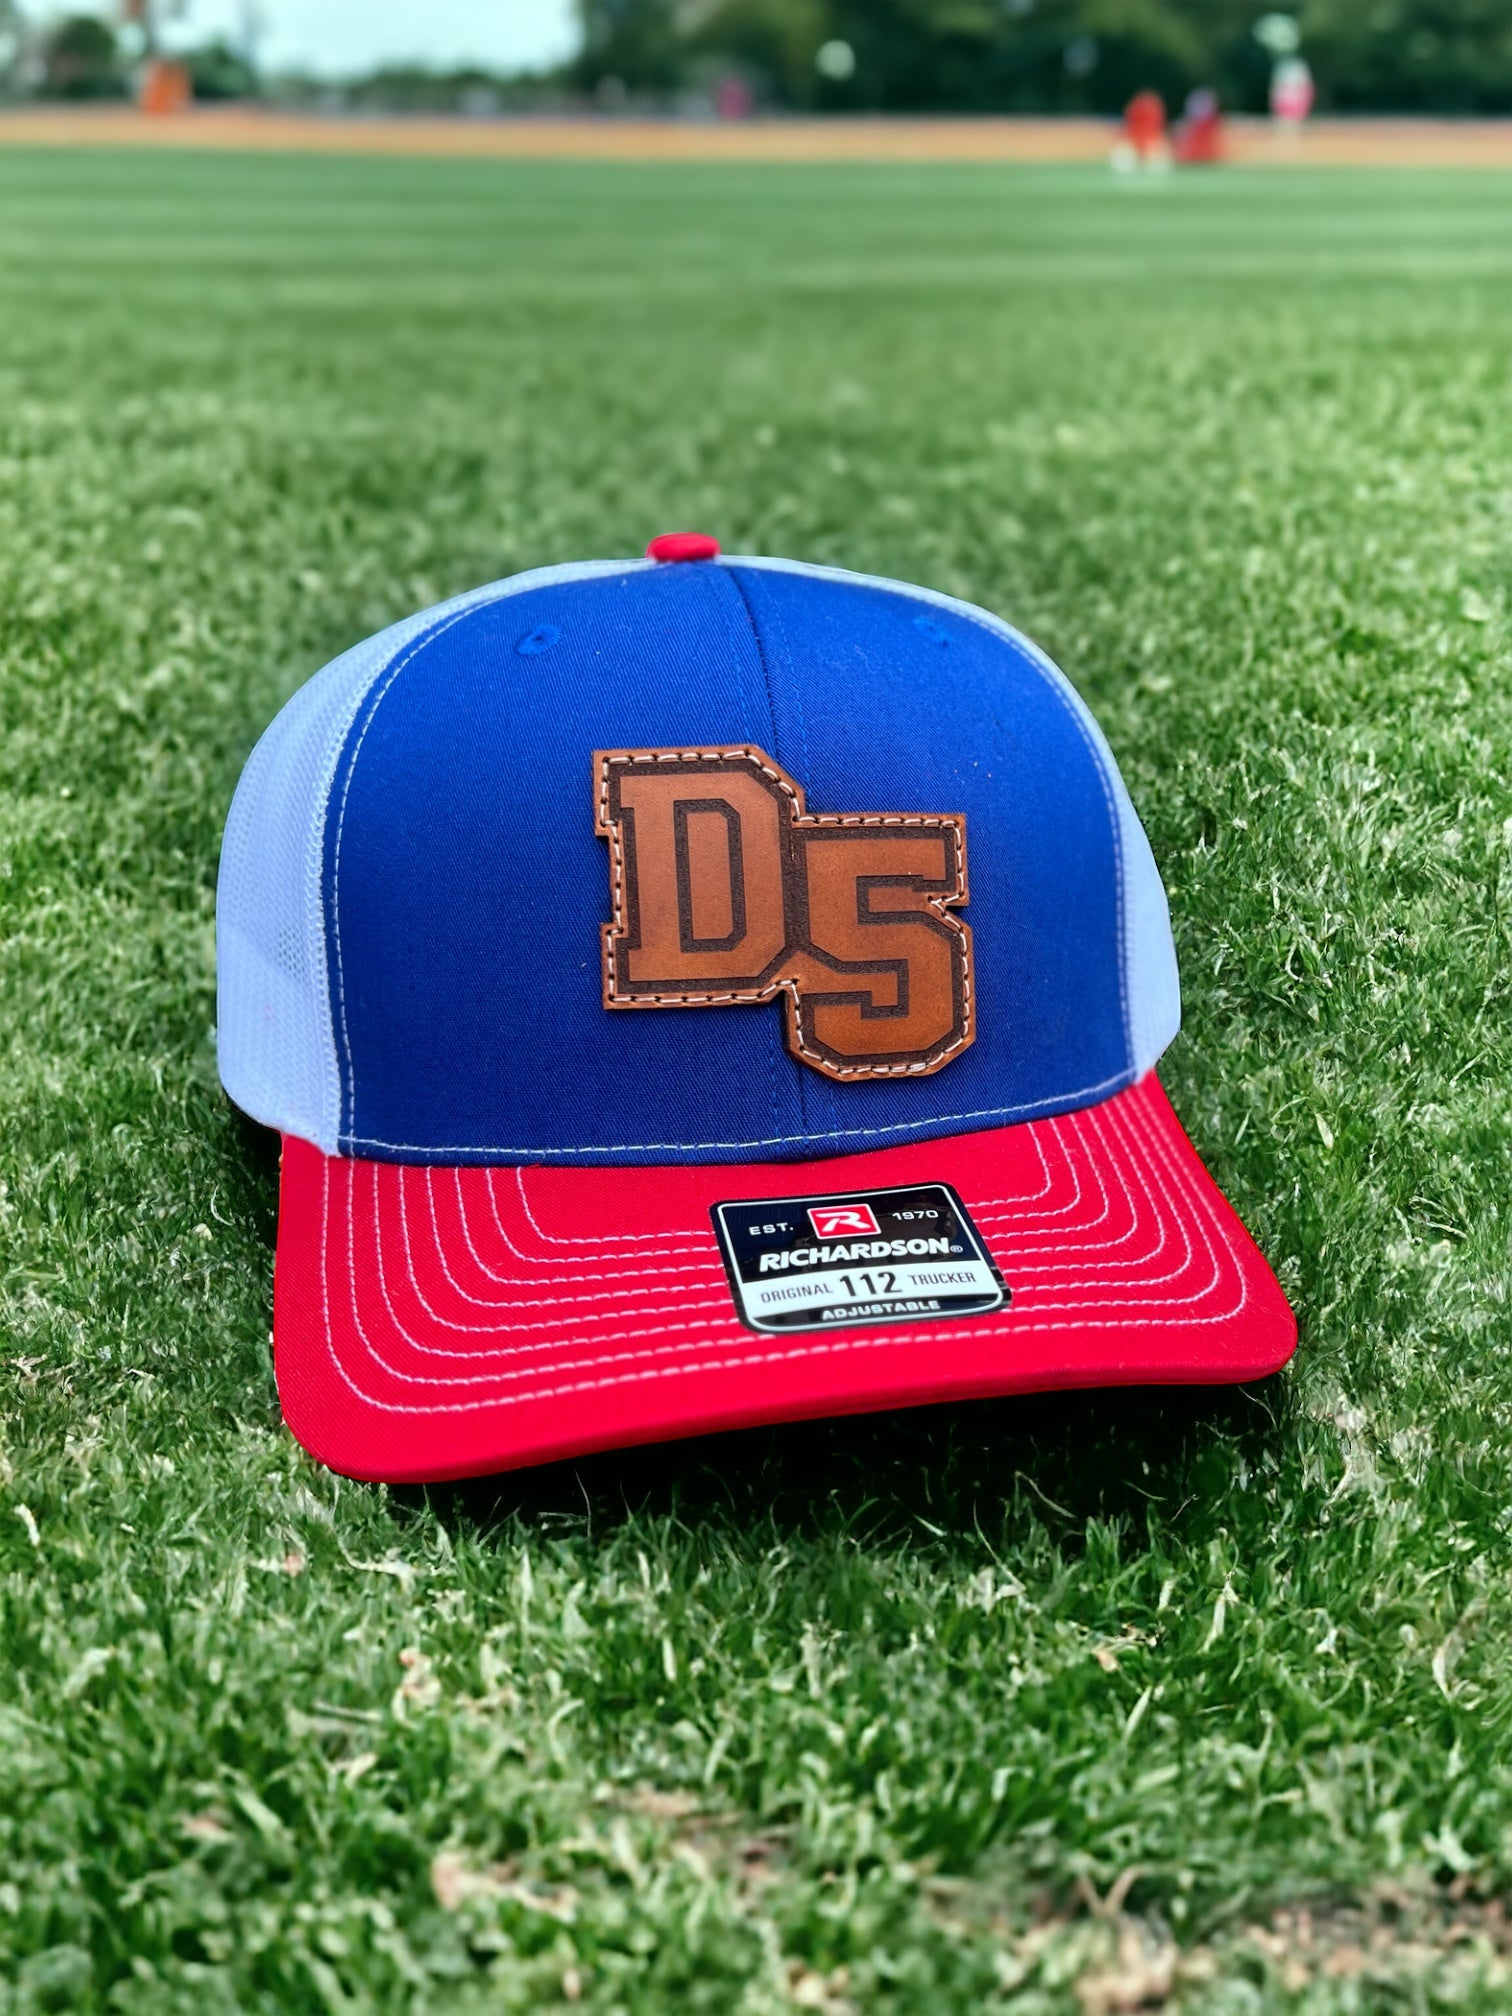 D5 Rebels Leather Patch Hat-Royal/White/Red